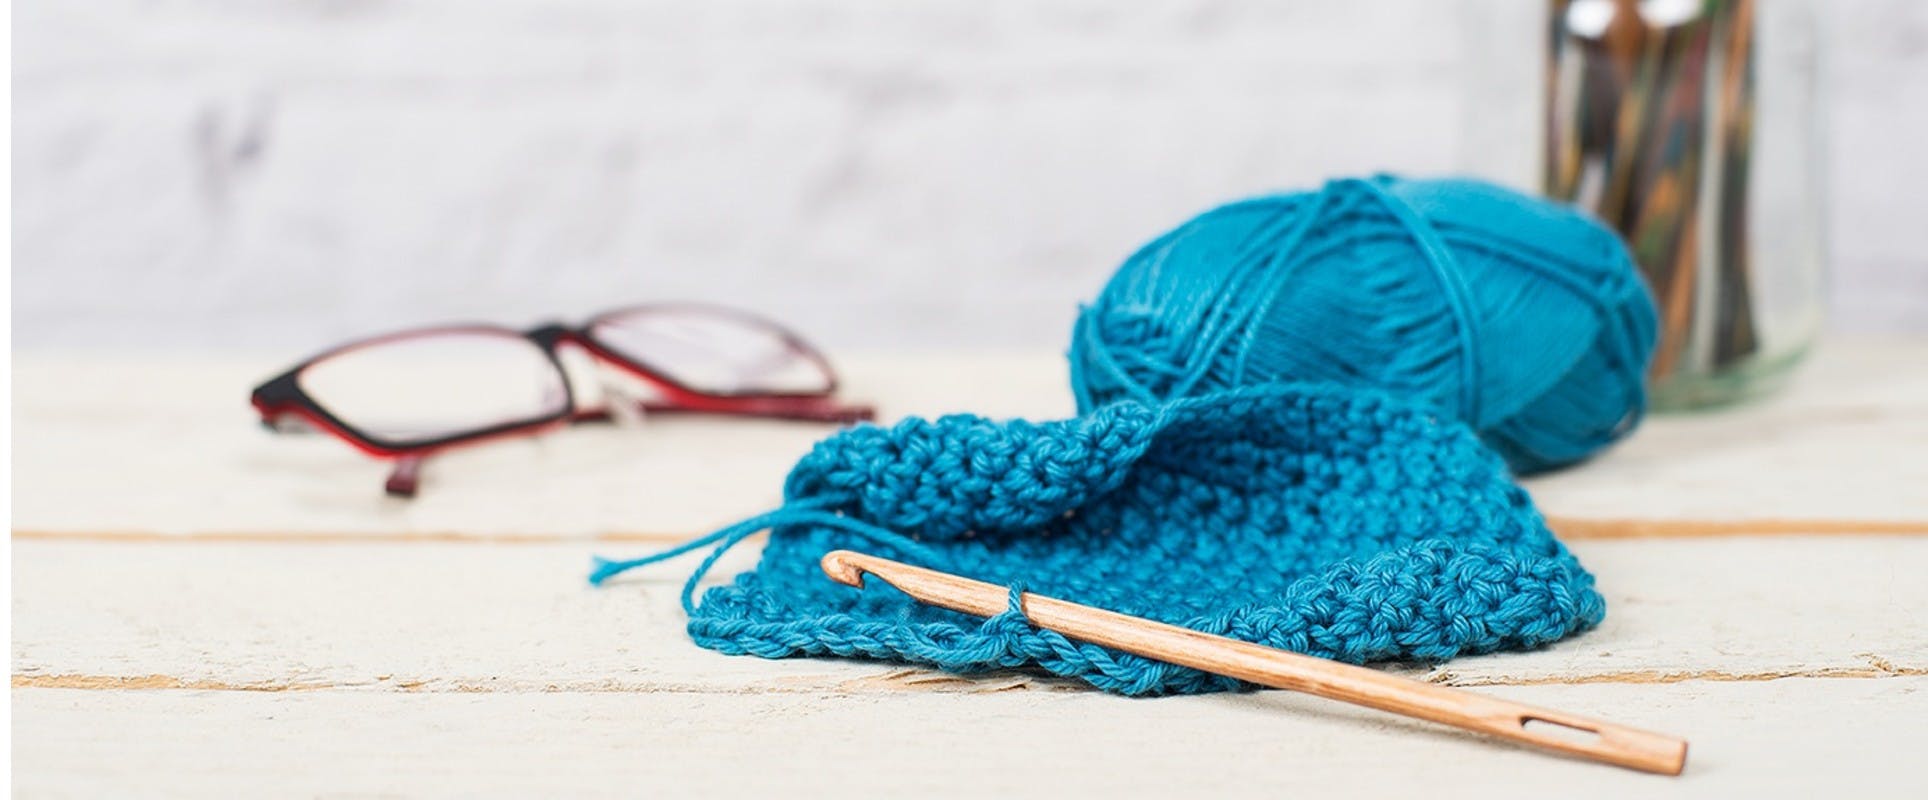 The Ultimate Guide to Crochet Hooks: Everything You Need to Know